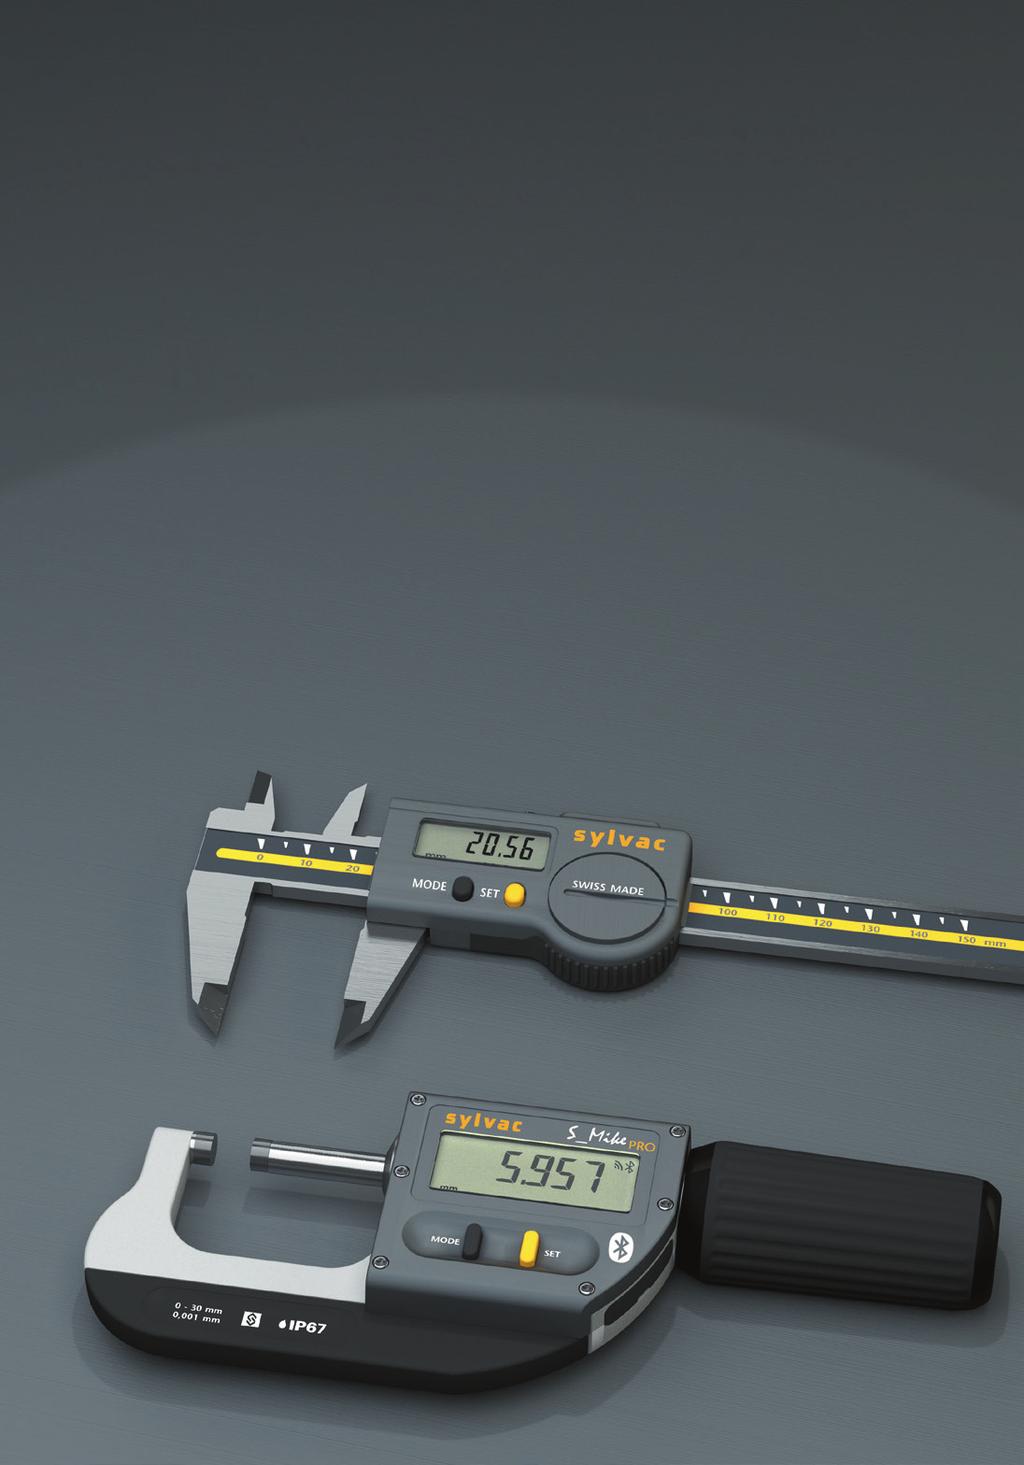 HND TOOLS In 1981, Sylvac launched the first caliper with digital read-out on the market. Quickly, other models followed and the market of these handtools took an incredible rise.